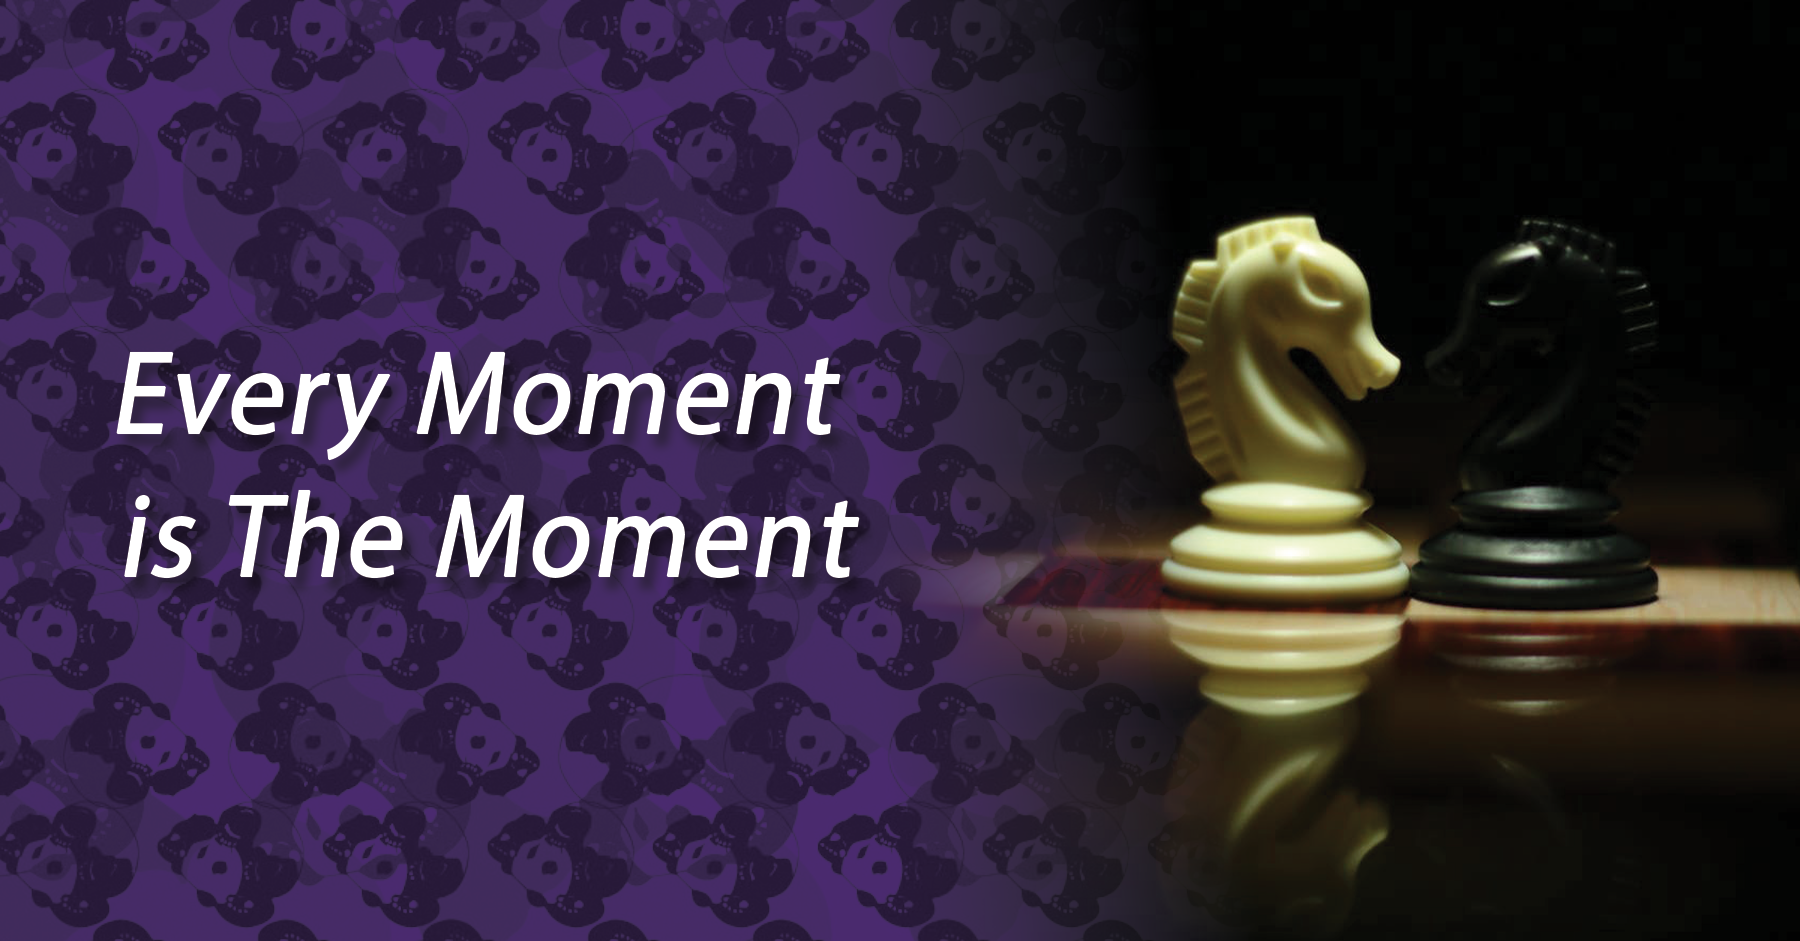 Every Moment is The Moment